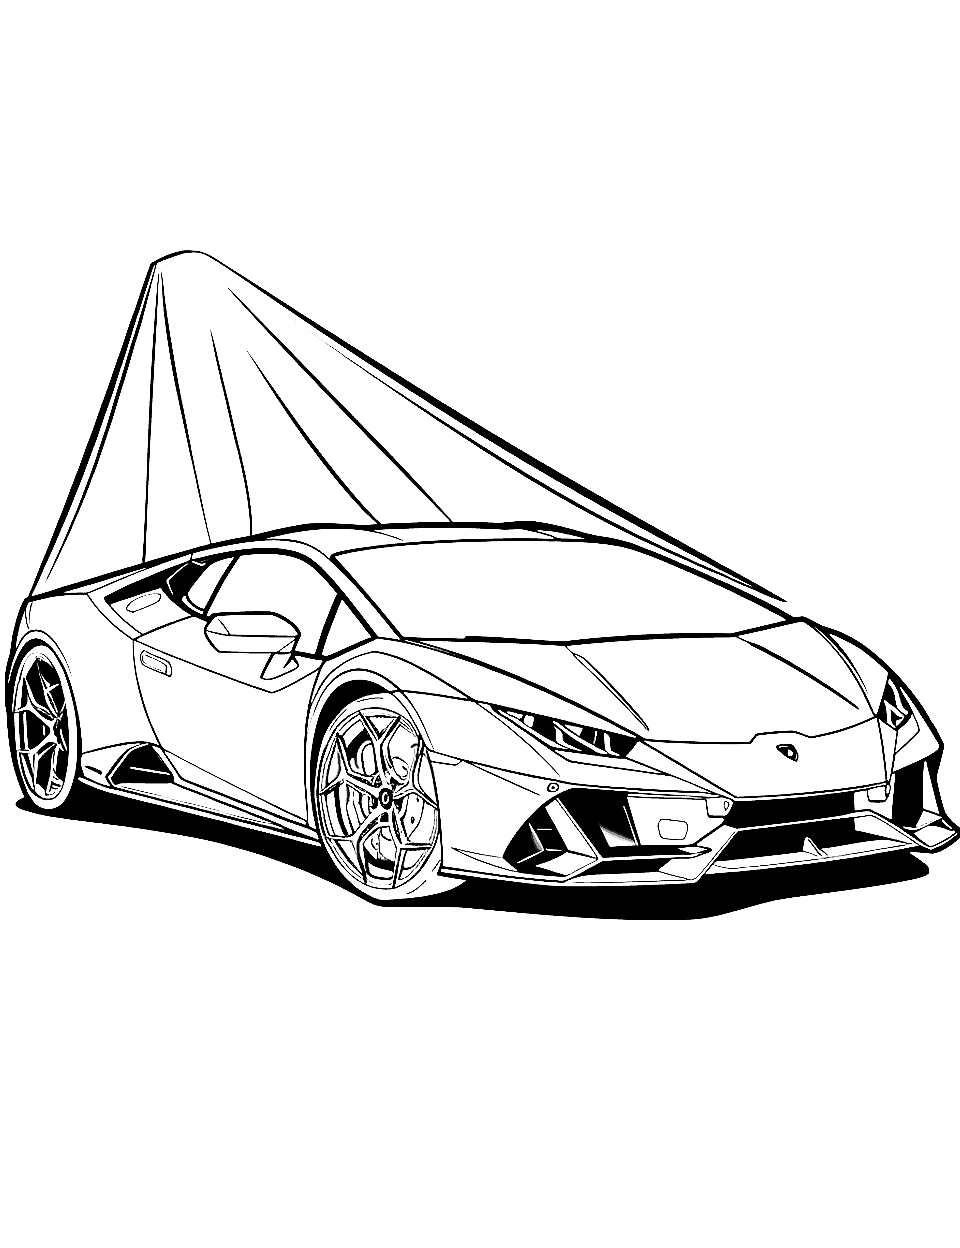 Revuelto Revealed Lamborghini Coloring Page - A Lamborghini Revuelto is unveiled at a car show, with a cloth being pulled away.